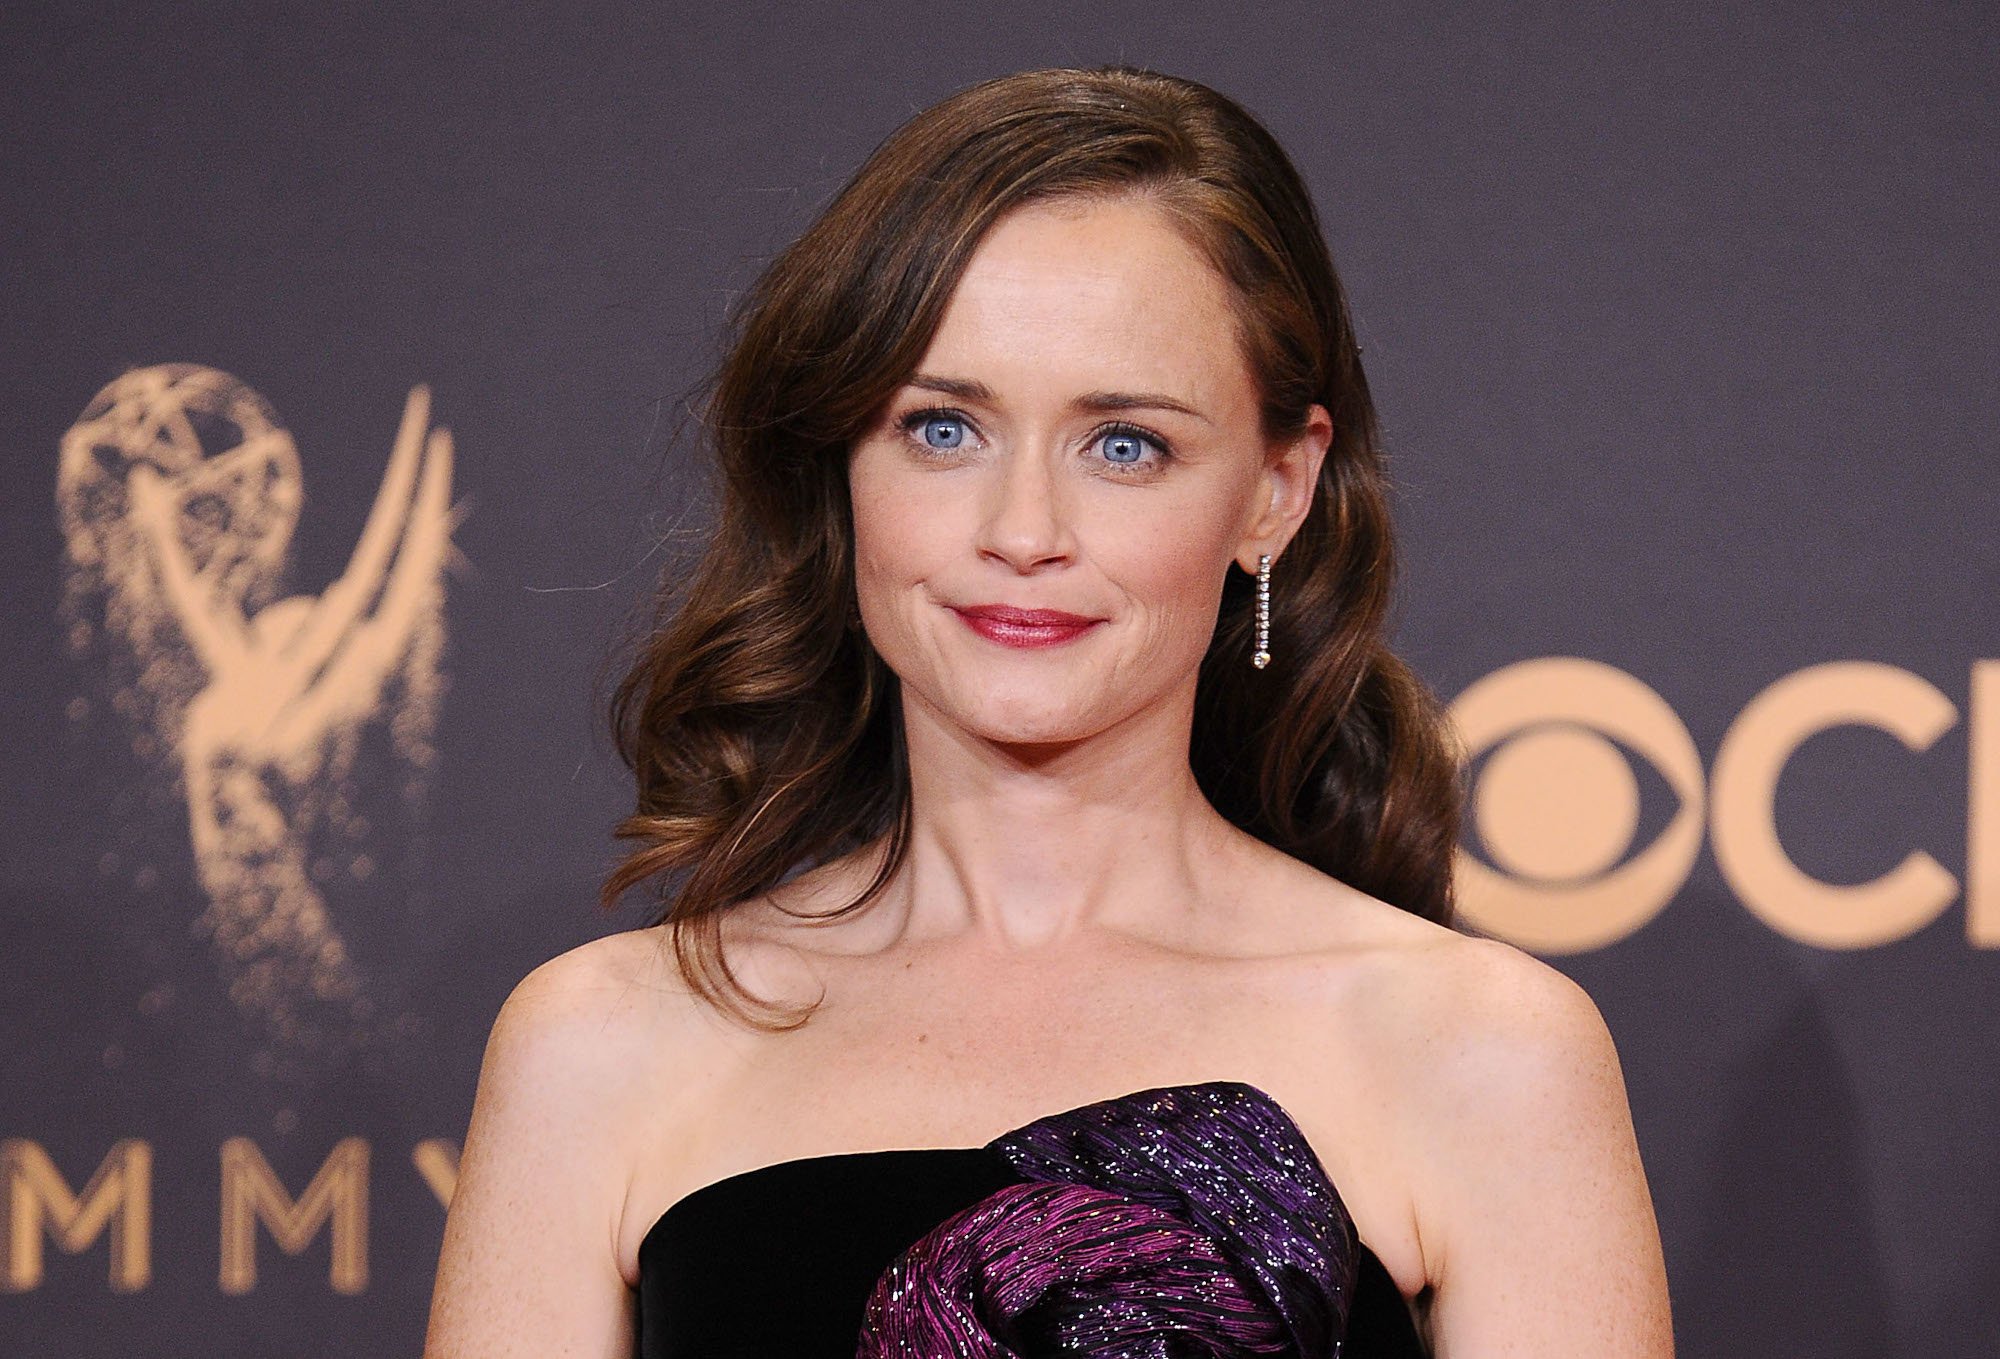 'Gilmore Girls' star Alexis Bledel on the red carpet at the Emmy Awards. The 'Gilmore Girls' alum was surprised by Rory's decision to have an affair with Dean.